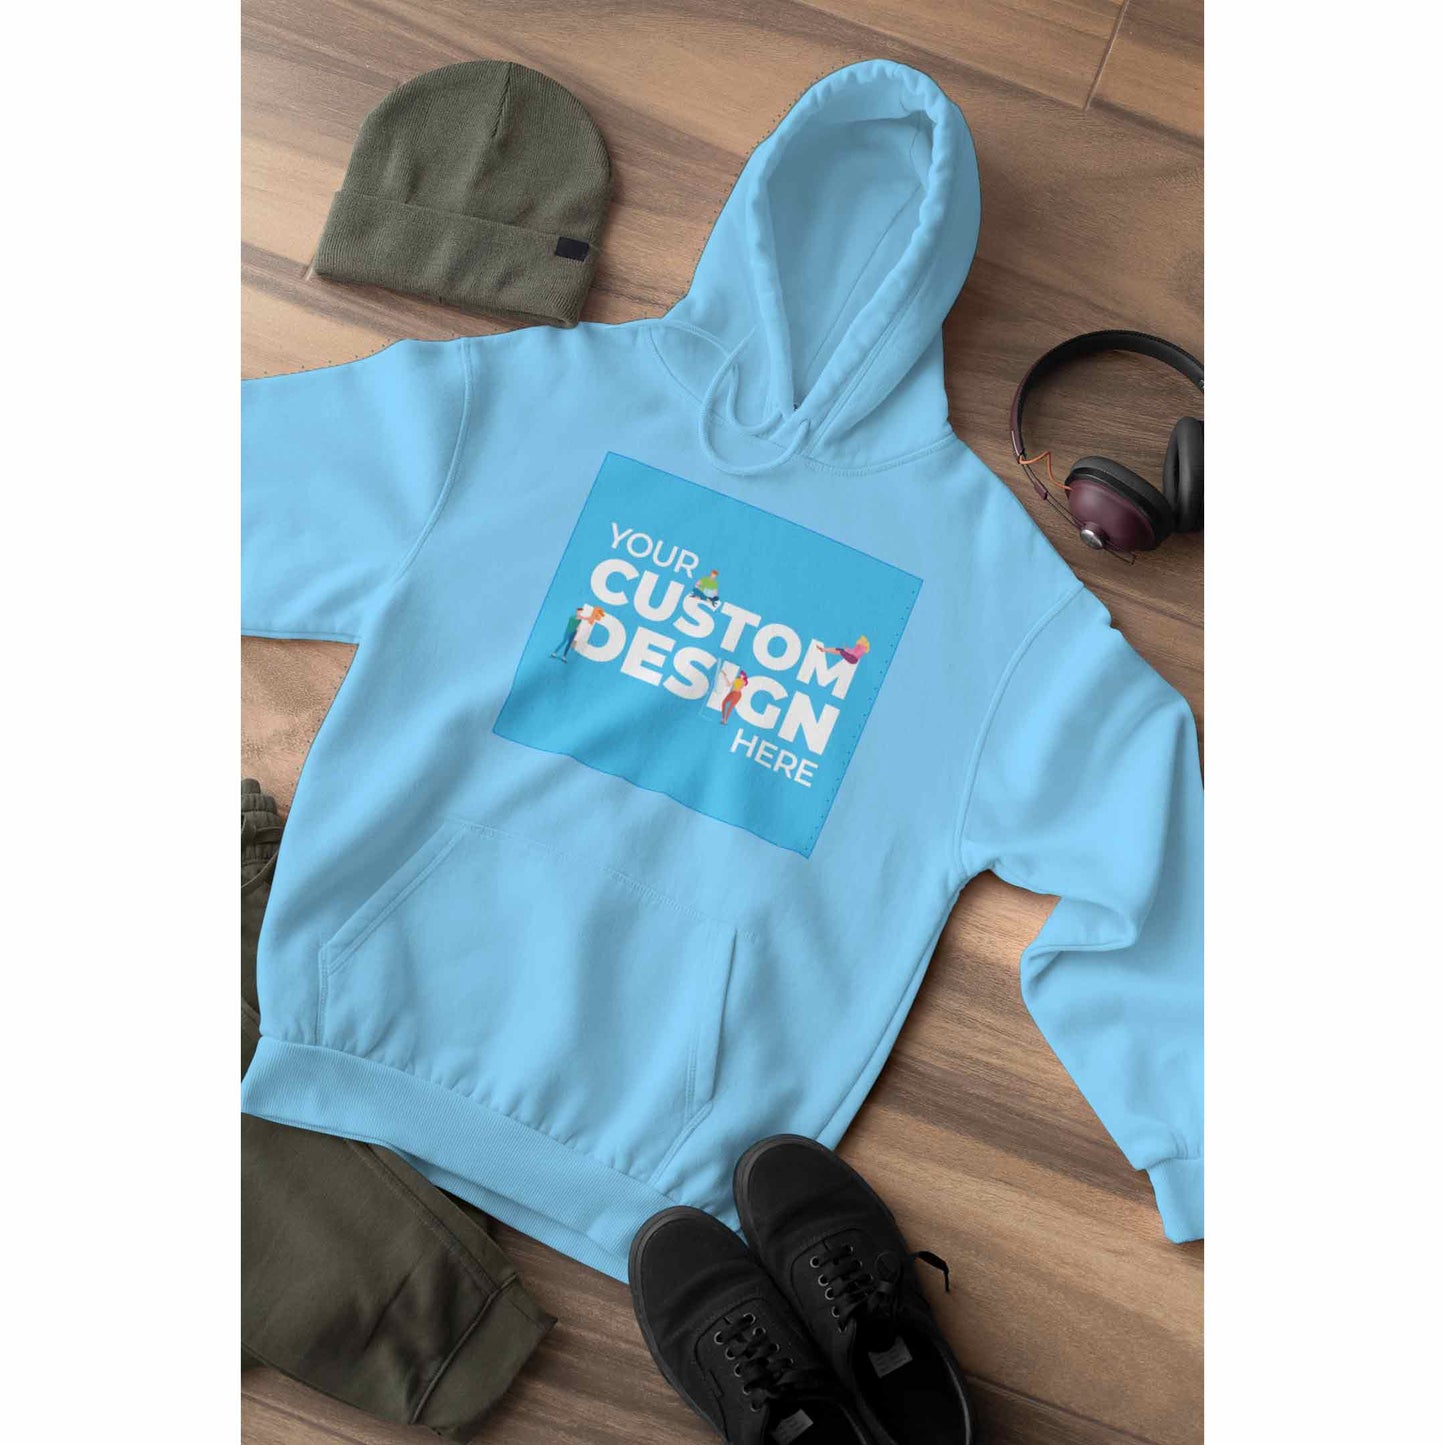 customized personalized gifts products hoodie customizable custom